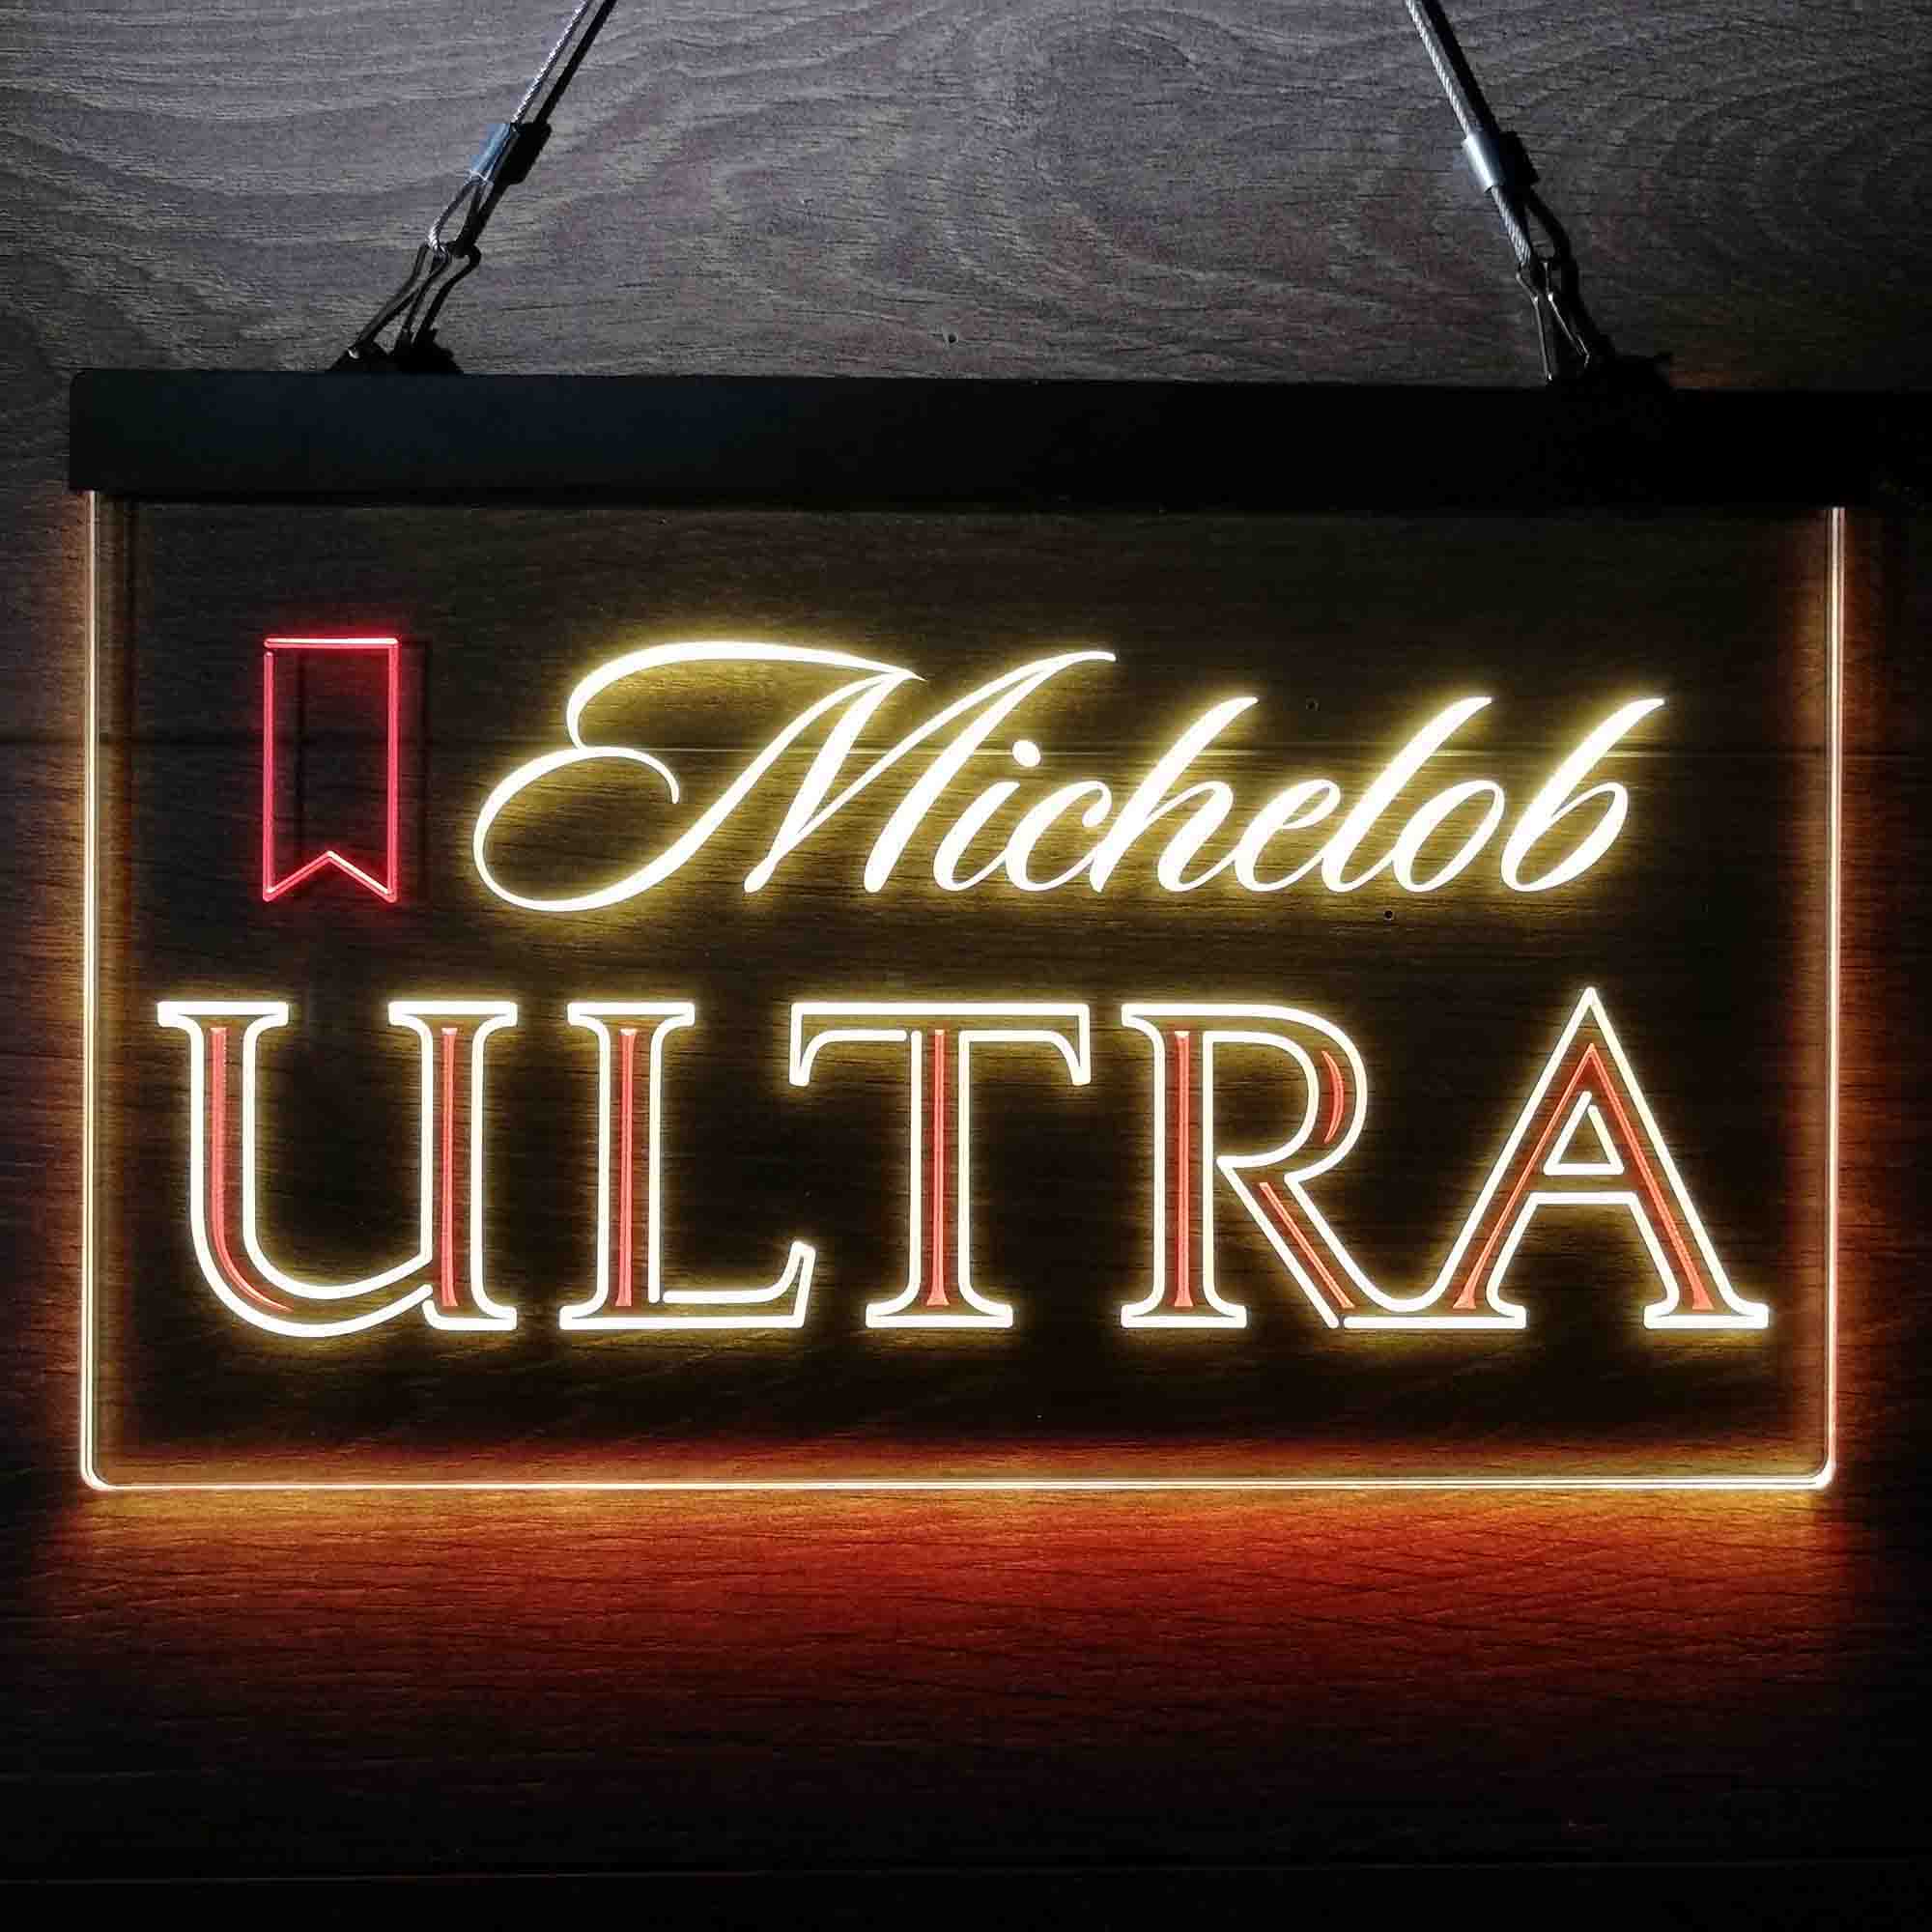 Michelobs Ultra Beer LED Neon Sign